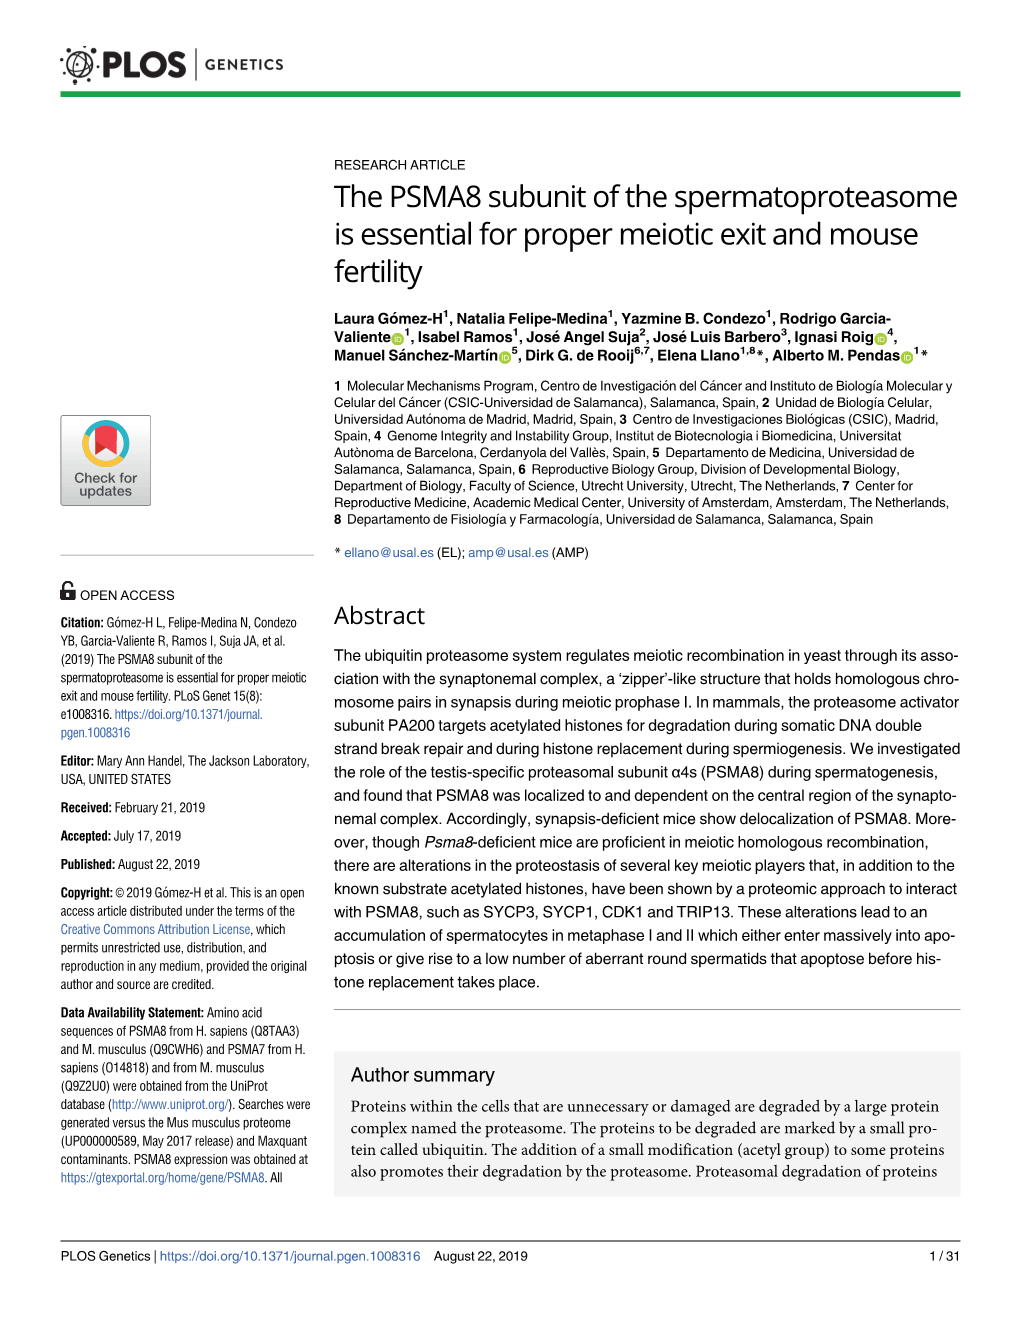 The PSMA8 Subunit of the Spermatoproteasome Is Essential for Proper Meiotic Exit and Mouse Fertility